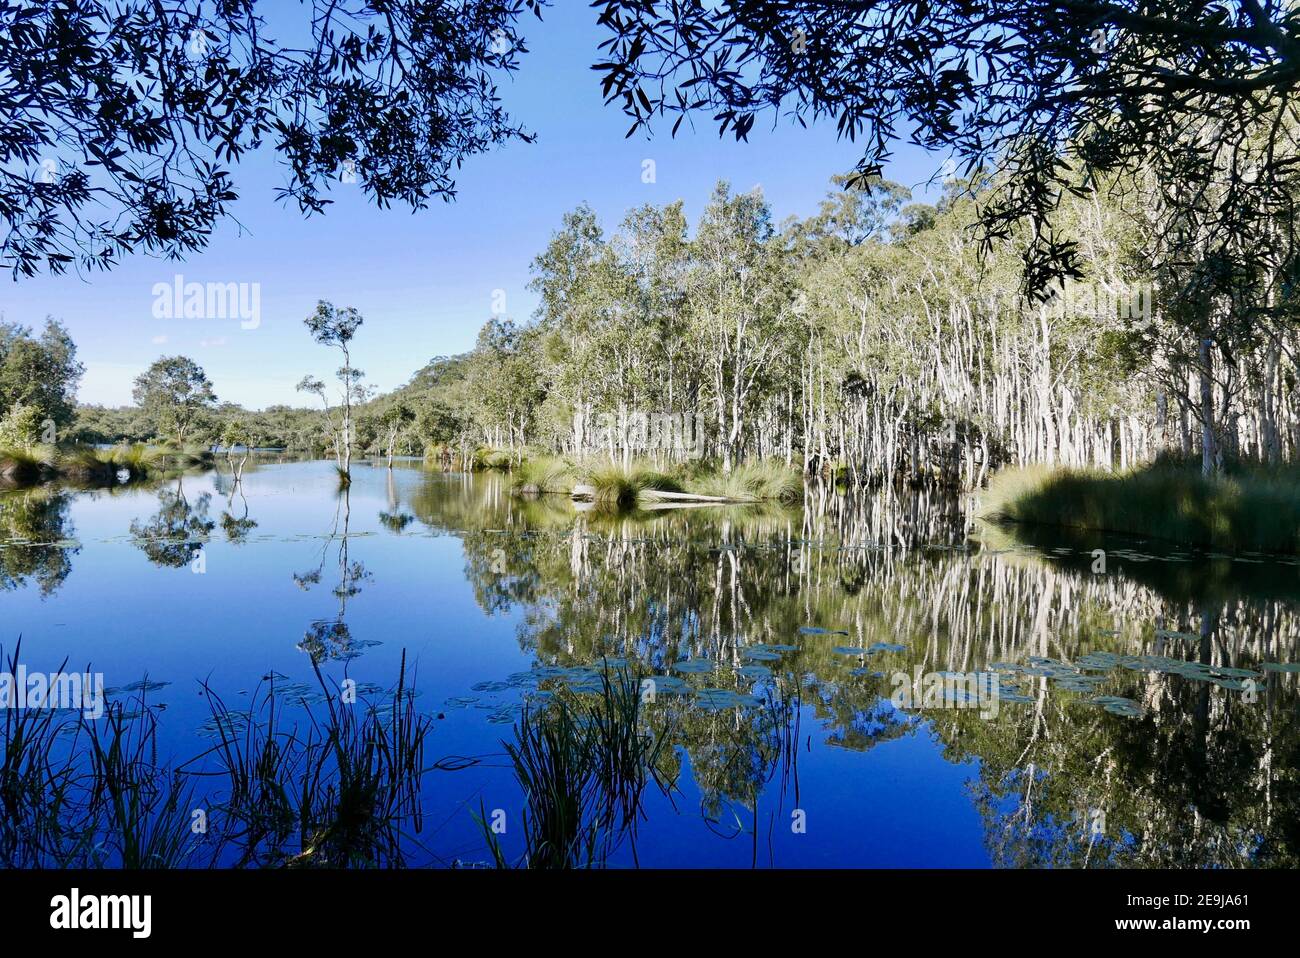 A rehabilitated environment on the Coffs Coast. Beautiful water reflections of the gum trees. Stock Photo